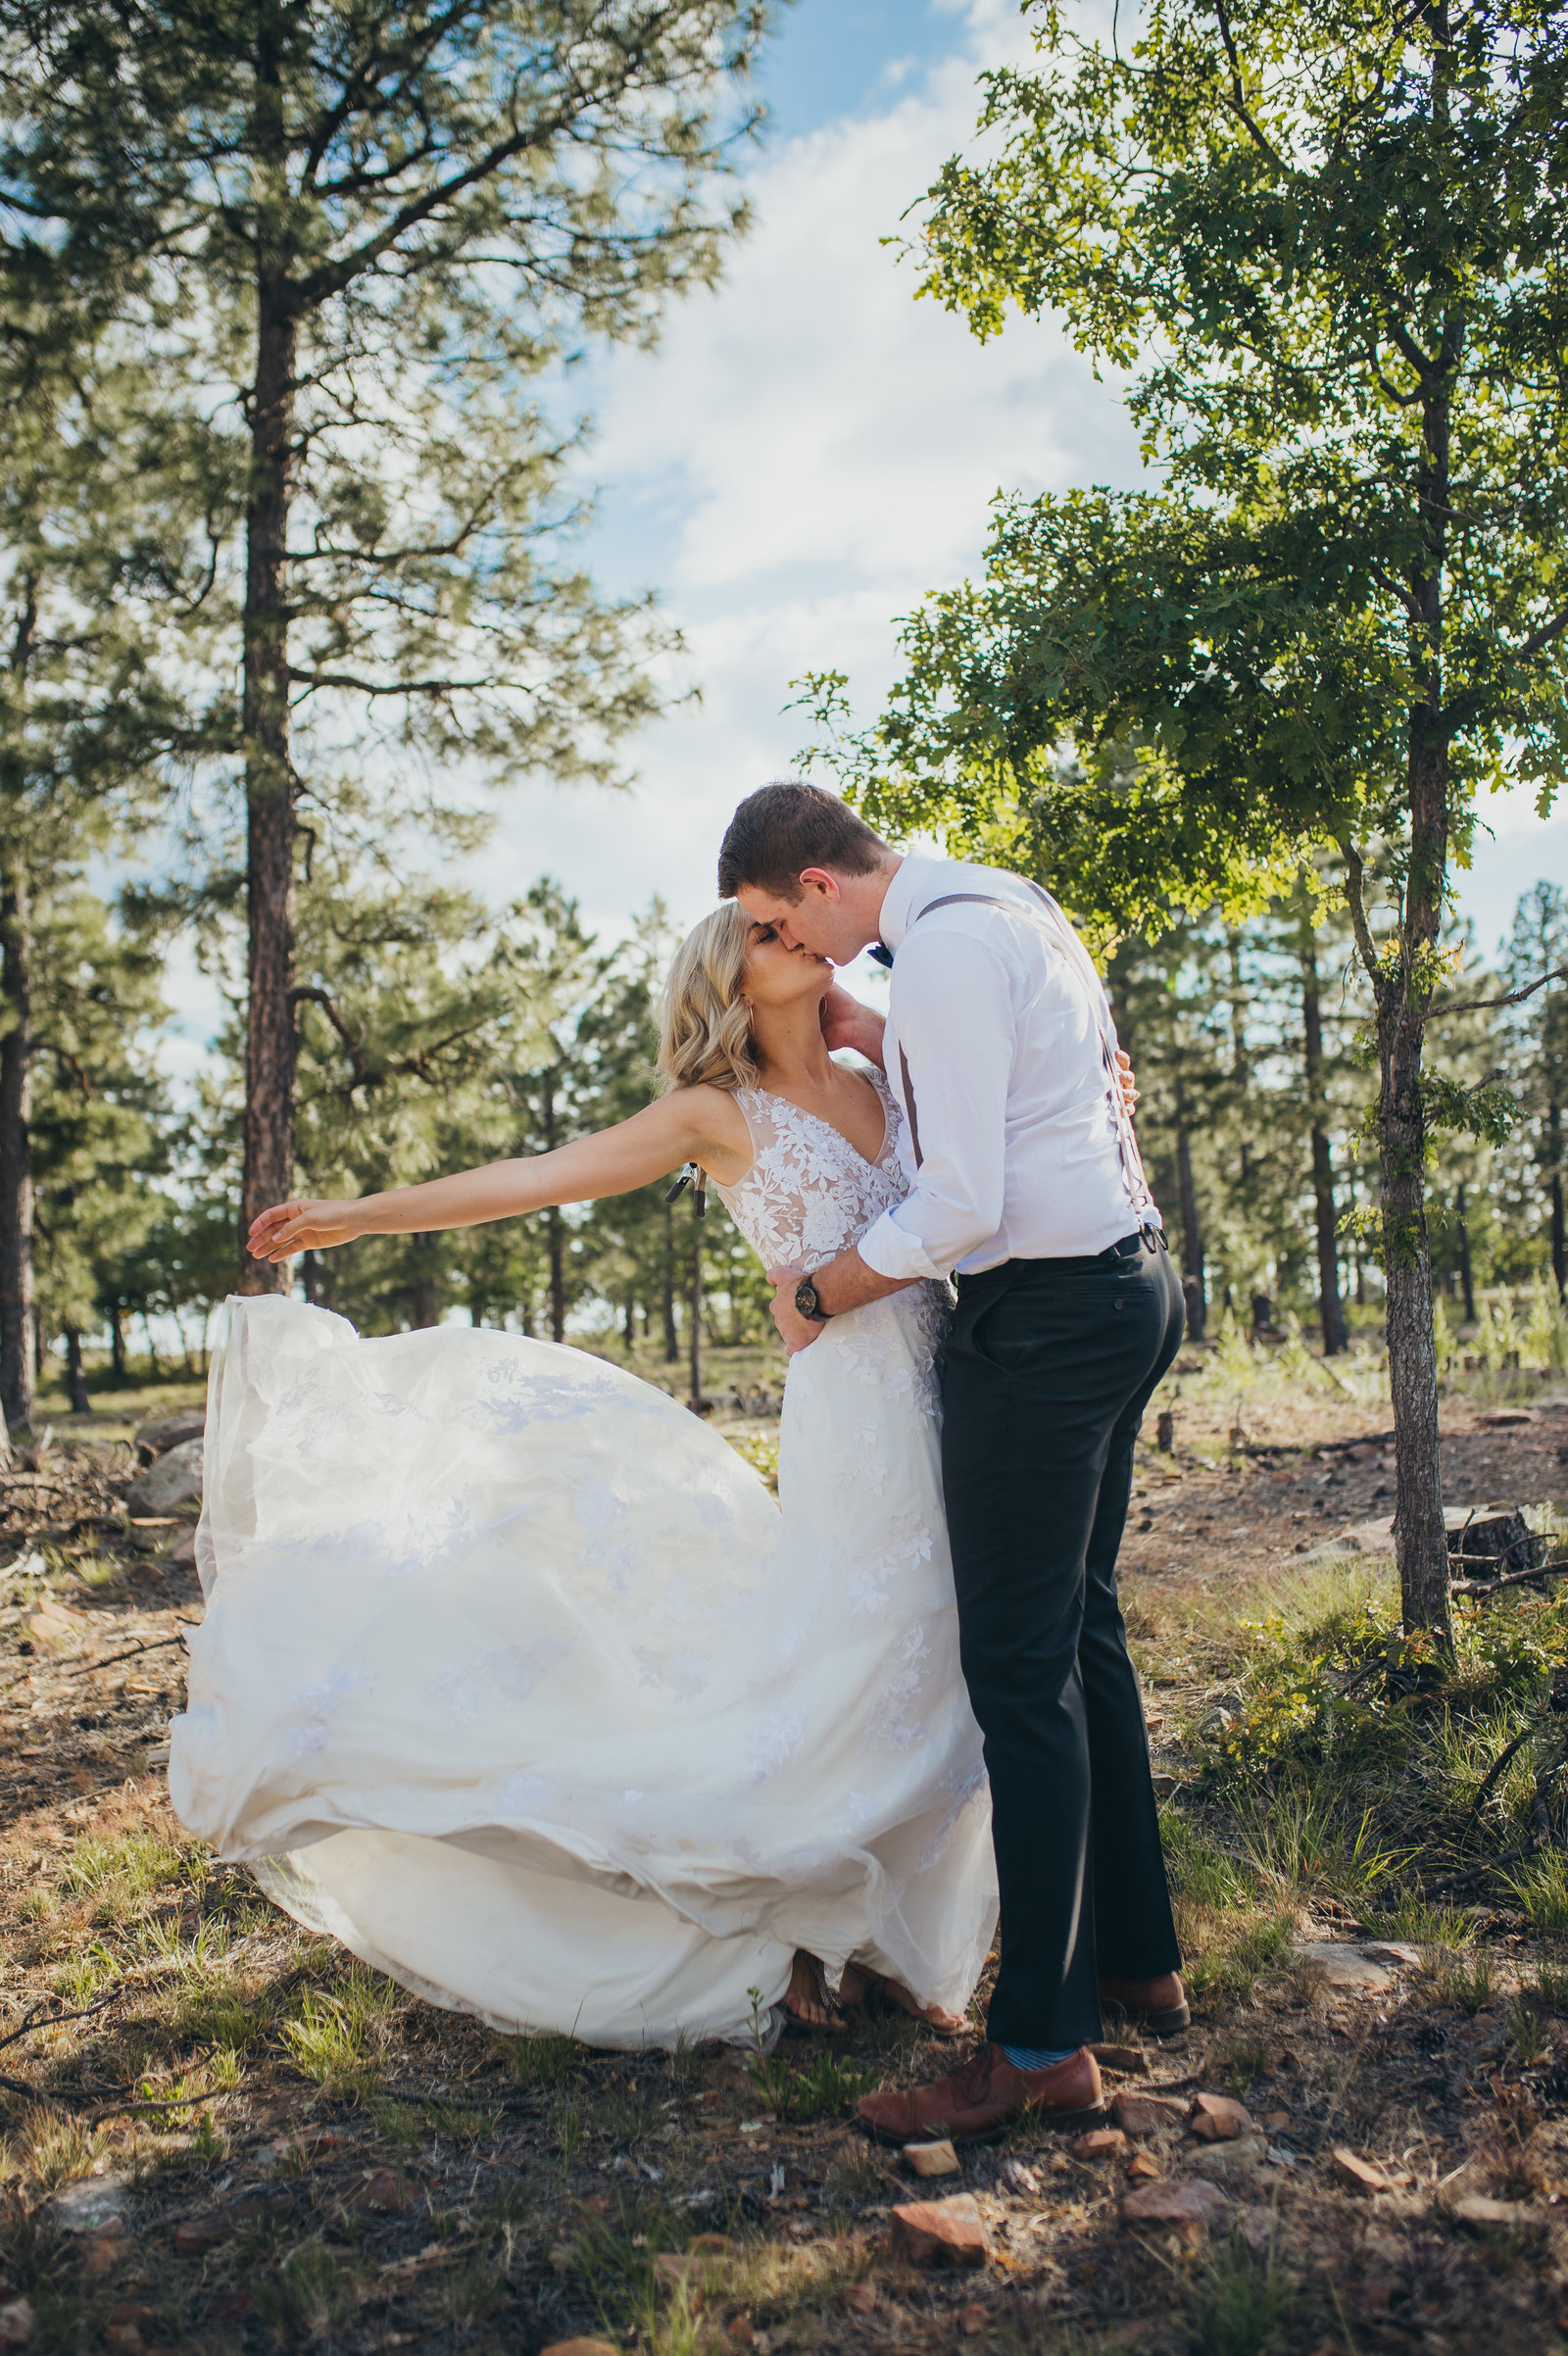 A couples intimate Elopement in Payson, Arizona